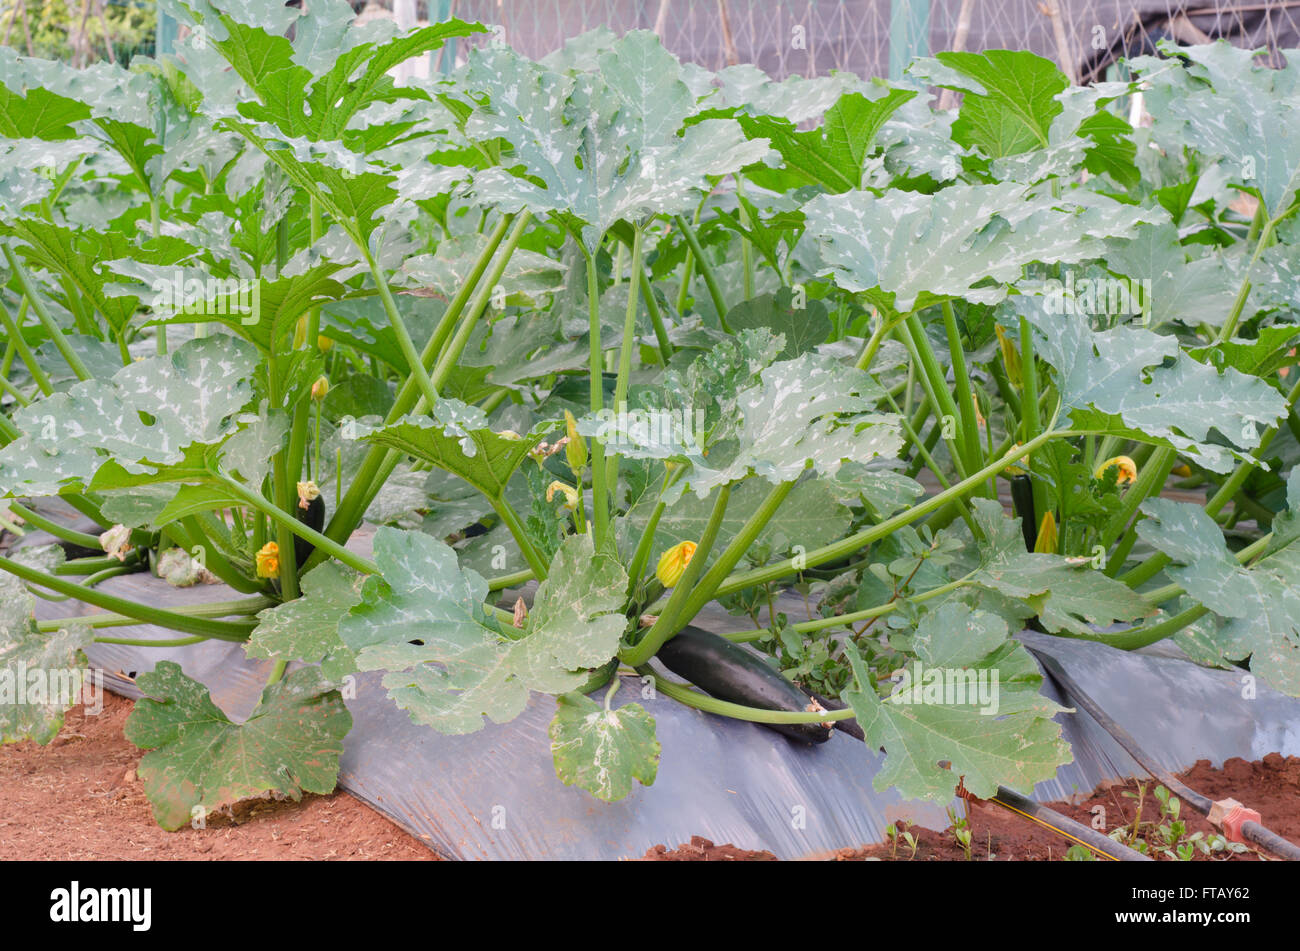 Zucchini or courgette plants growing in garden Stock Photo